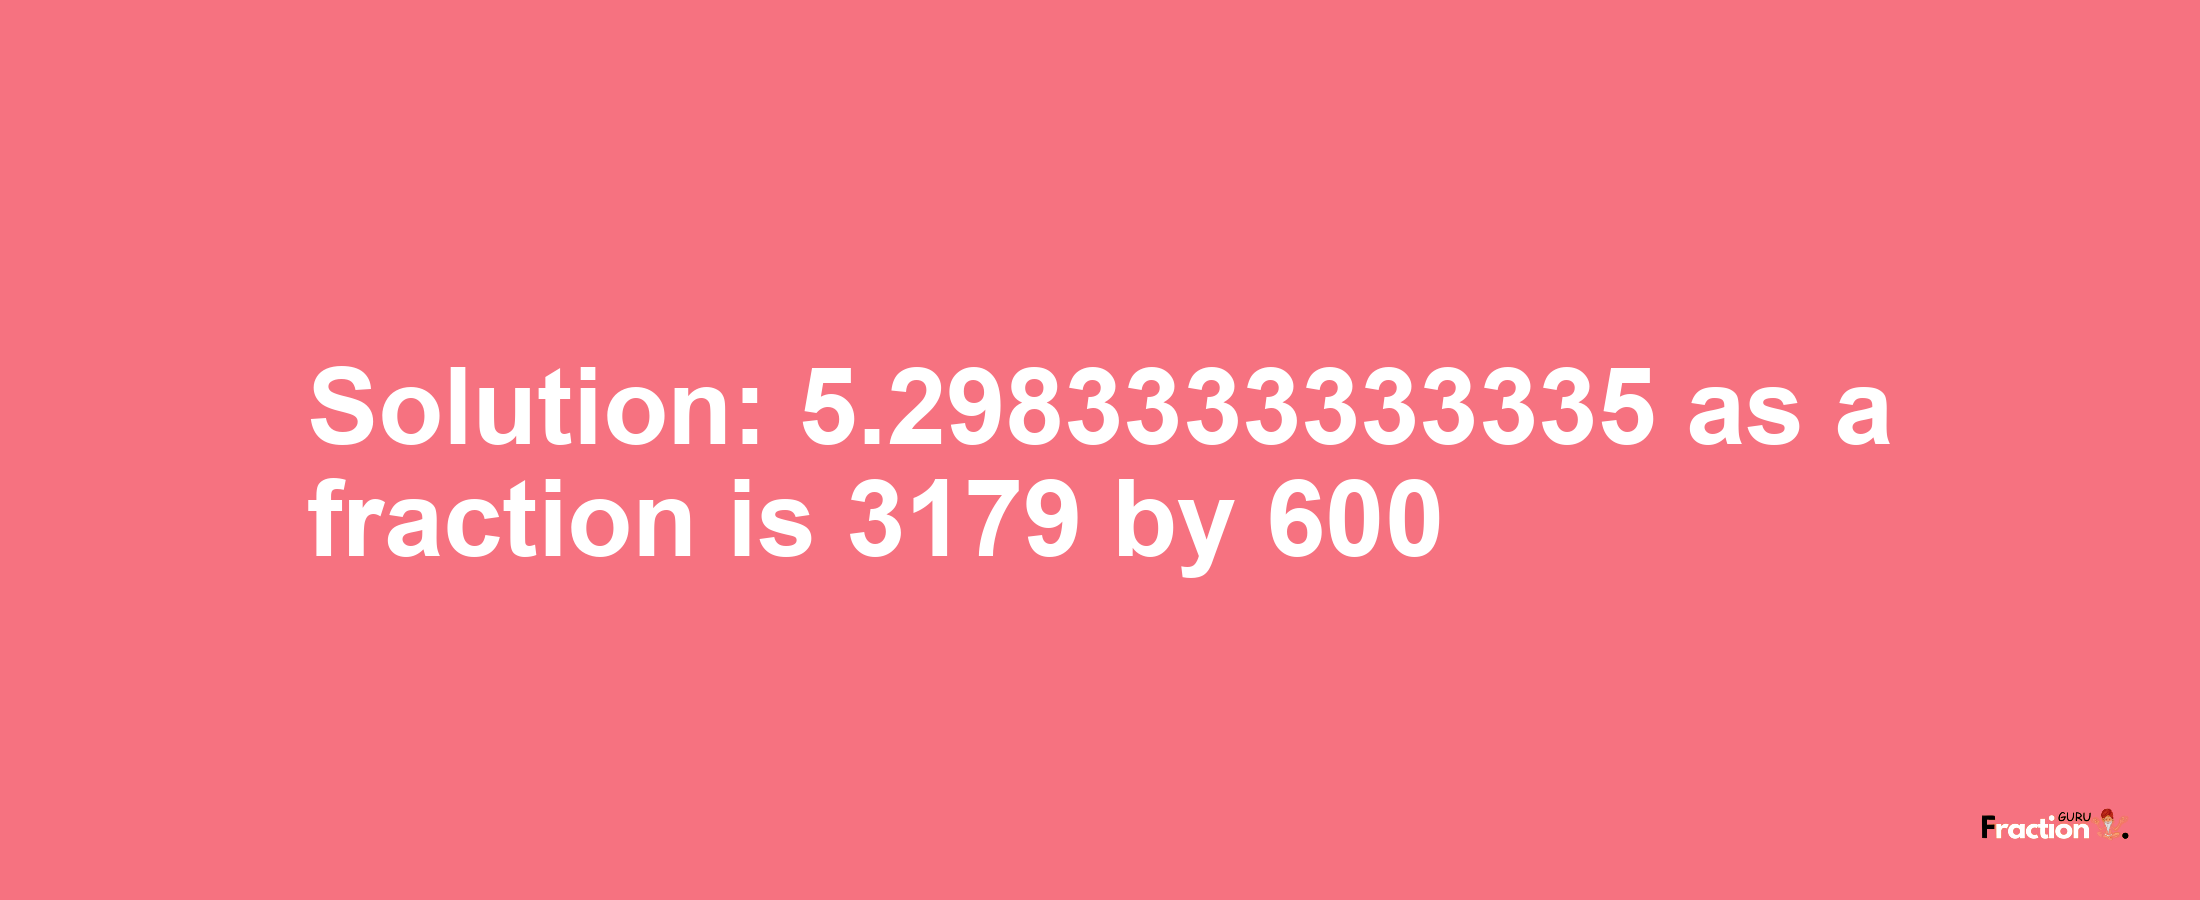 Solution:5.2983333333335 as a fraction is 3179/600